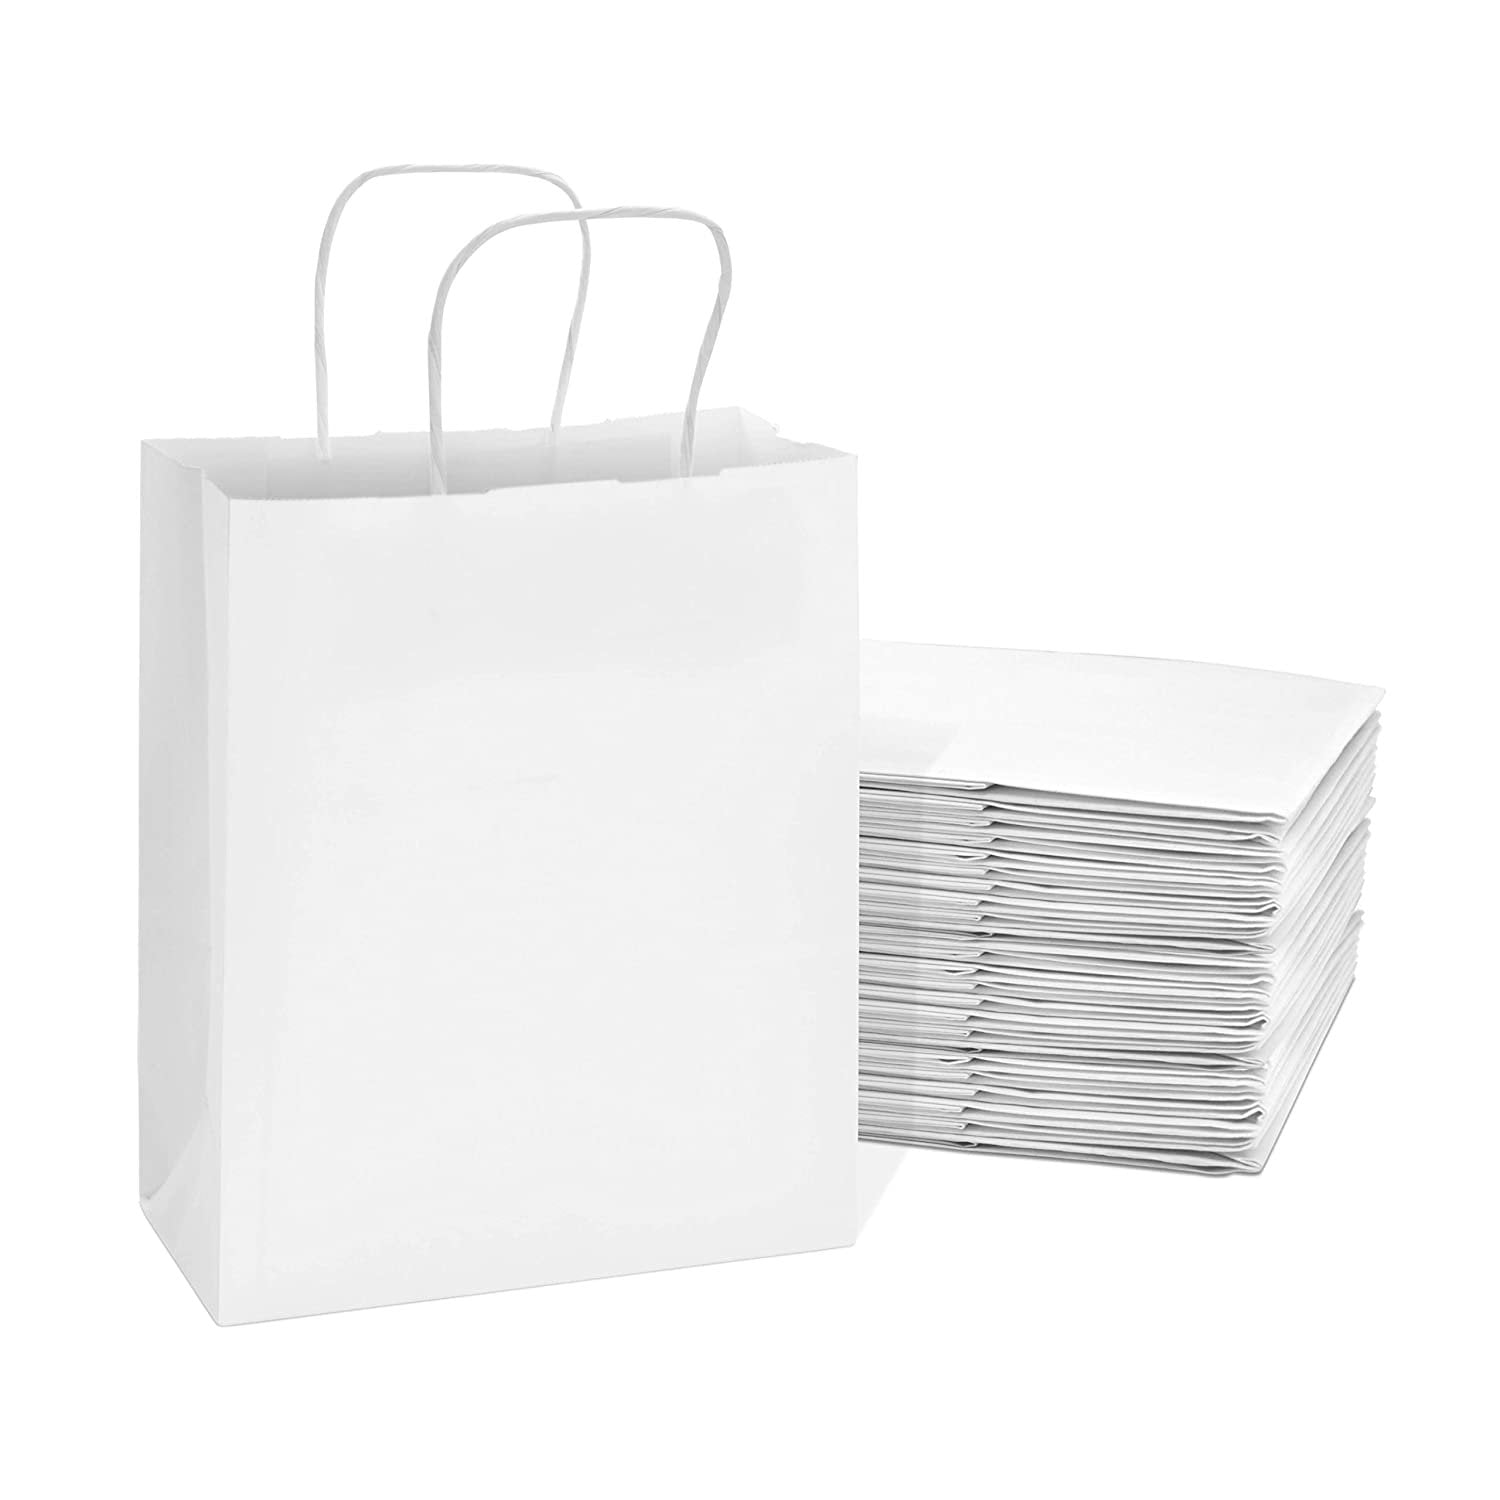 Mixed Medium Sizes White Paper Retail Gift Rope Handle Tote Shopping Bags 